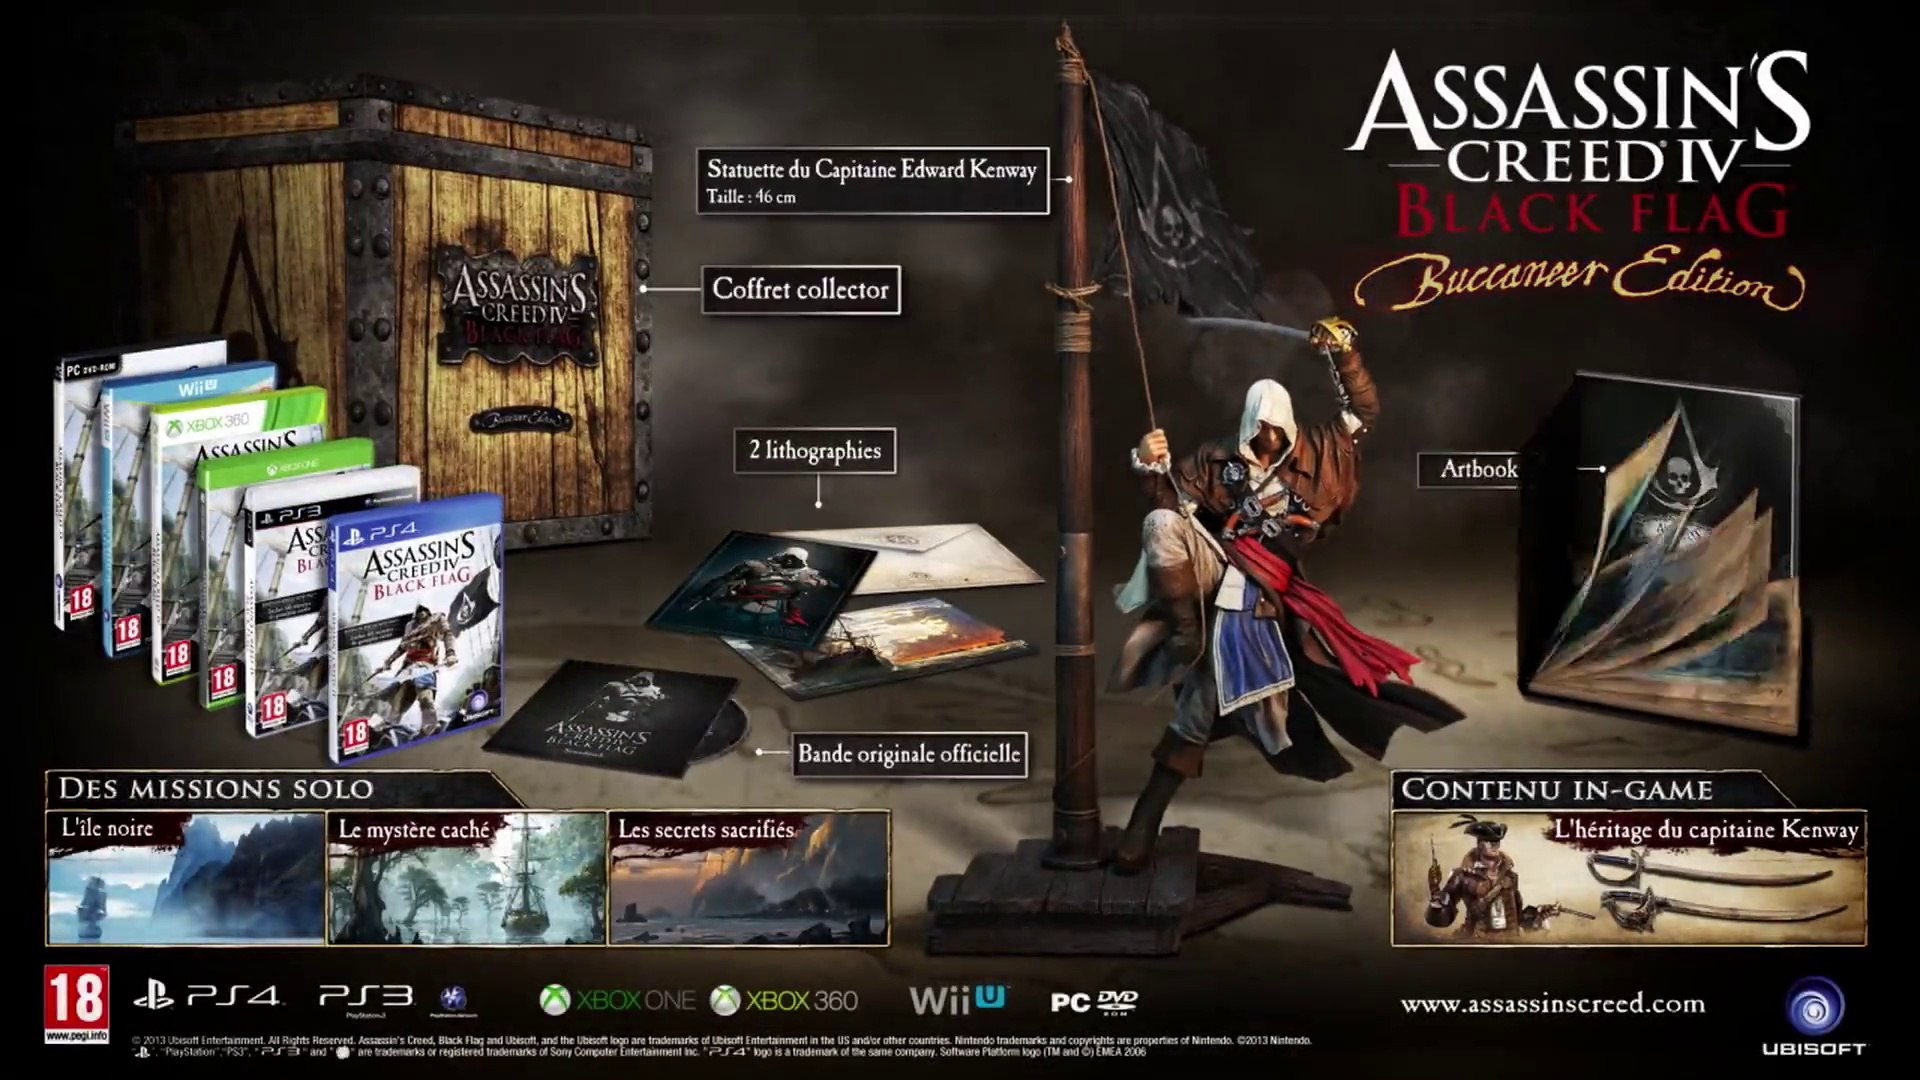 Assassin's Creed IV Black Flag Limited Edition XBOX 360 